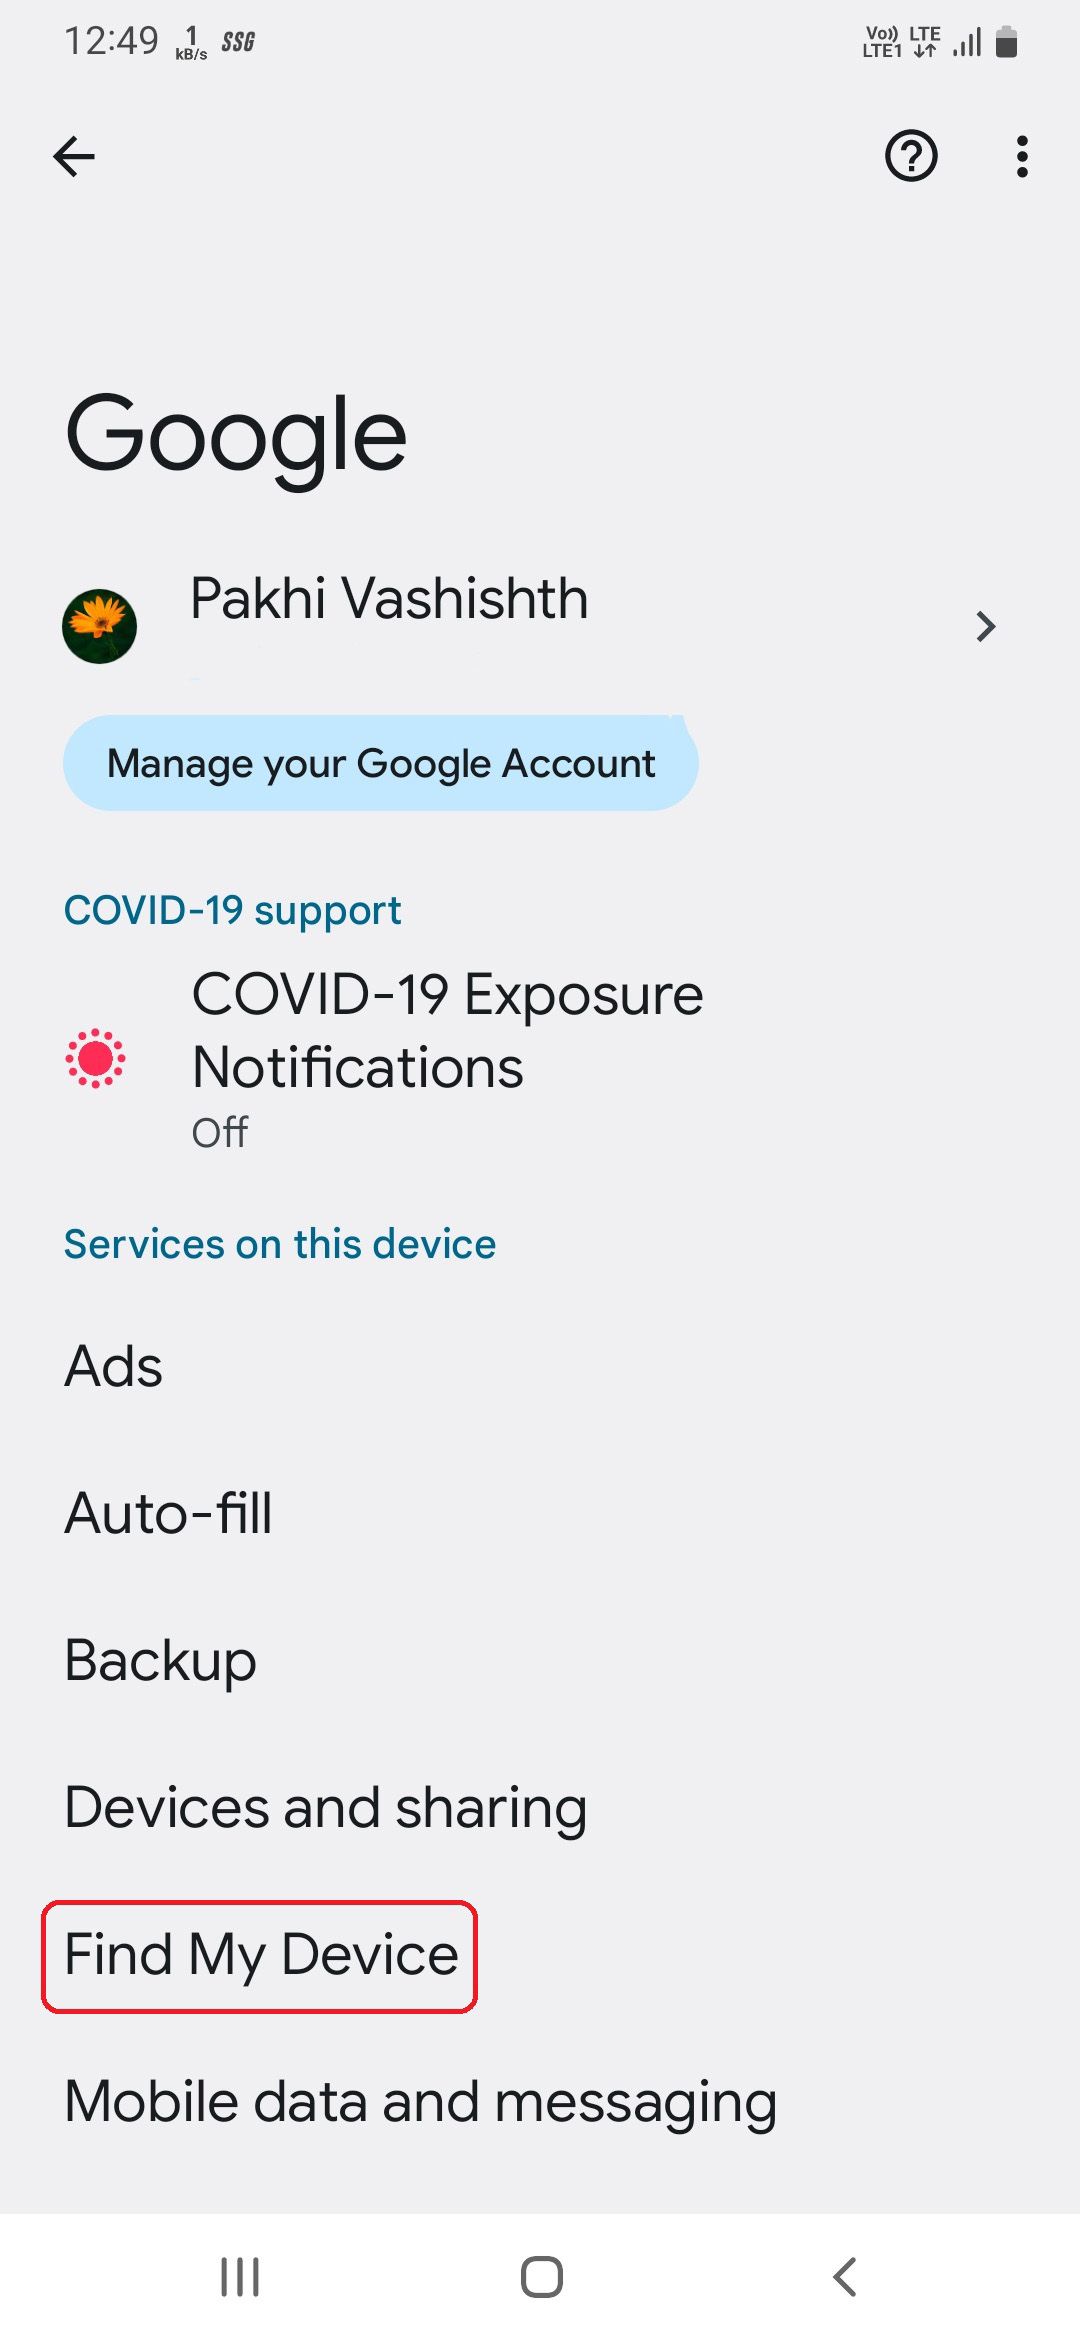 Find My Device options in Google's settings